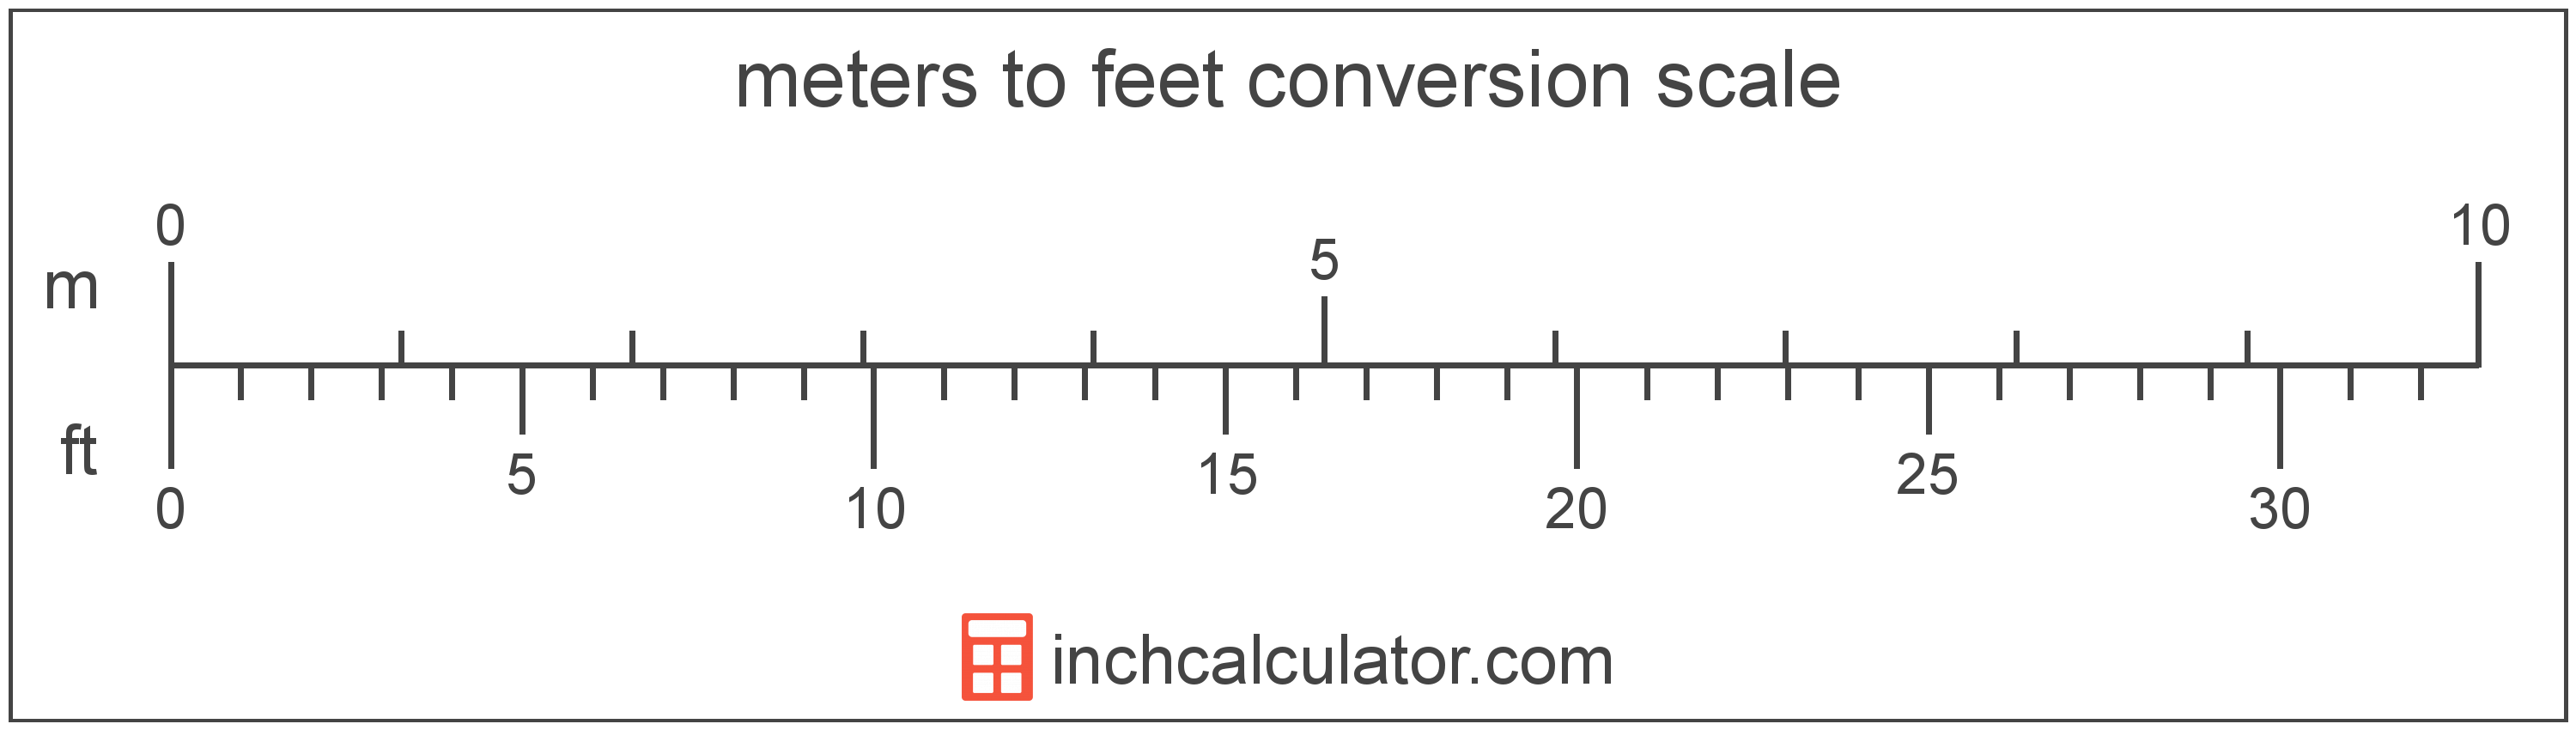 Feet Into Meters Conversion Chart